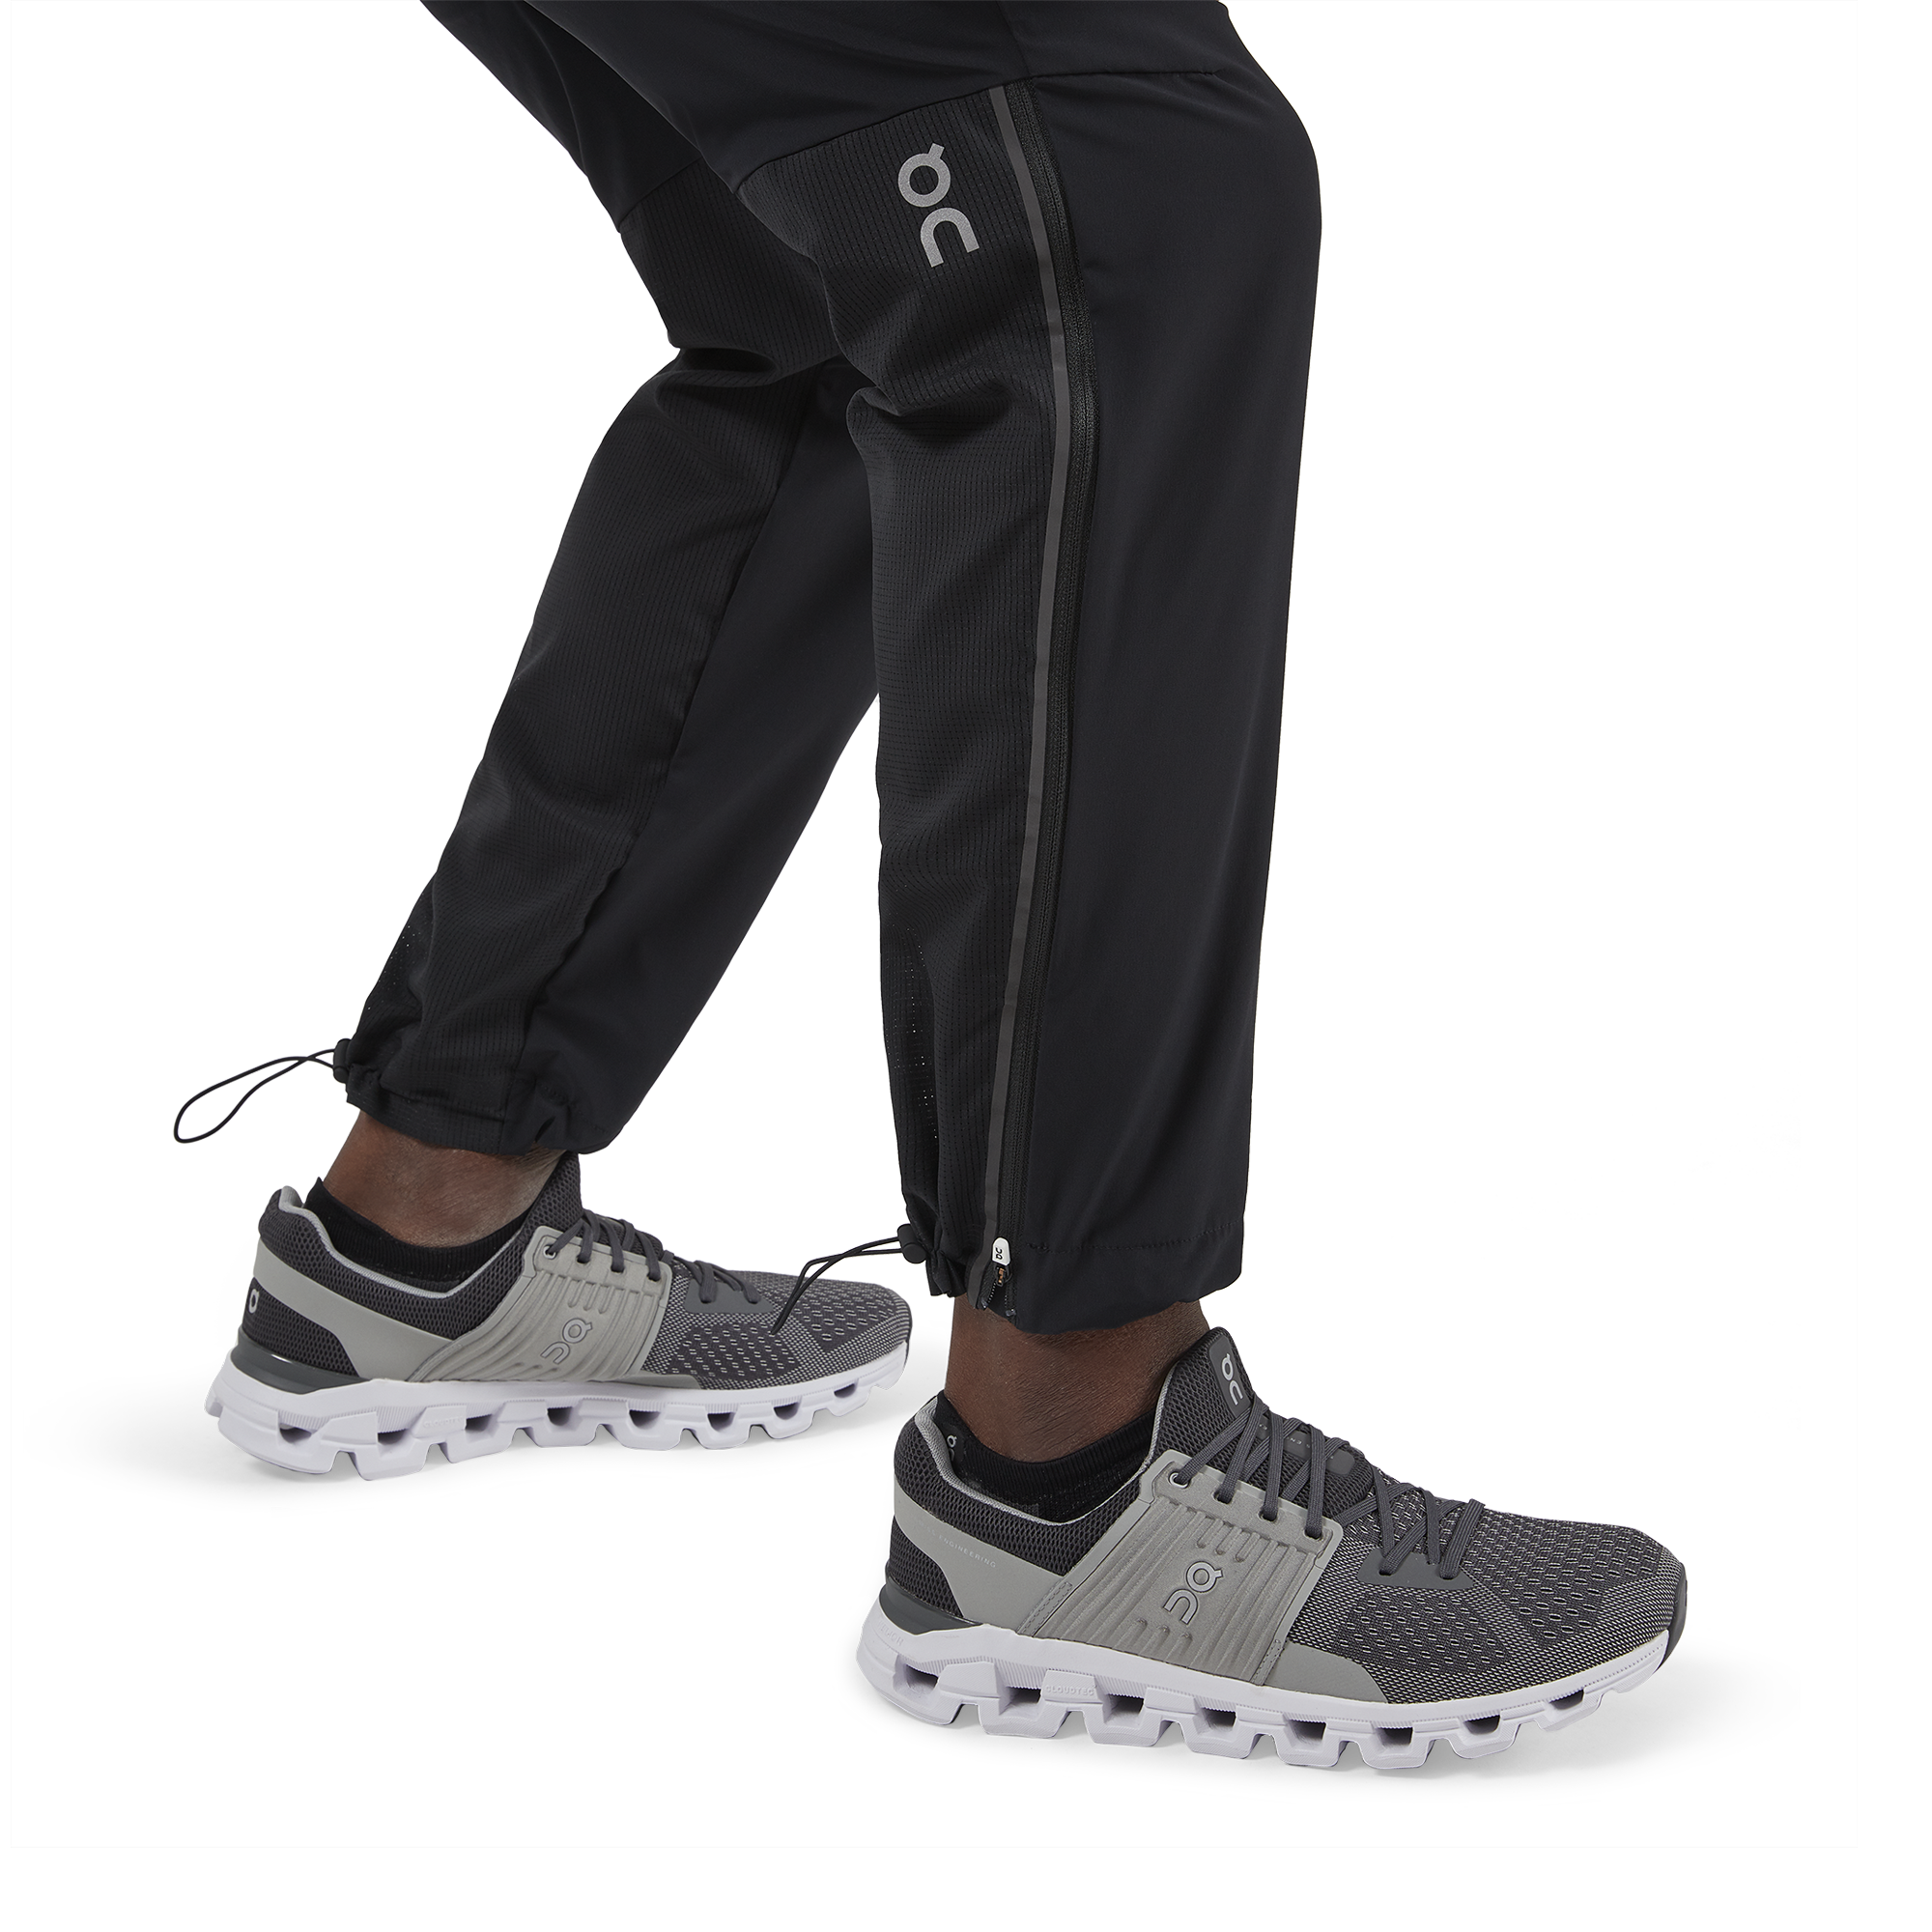 BW:Beatwide Men's Ns Lycra Track Pants Comfortable Lower for Men